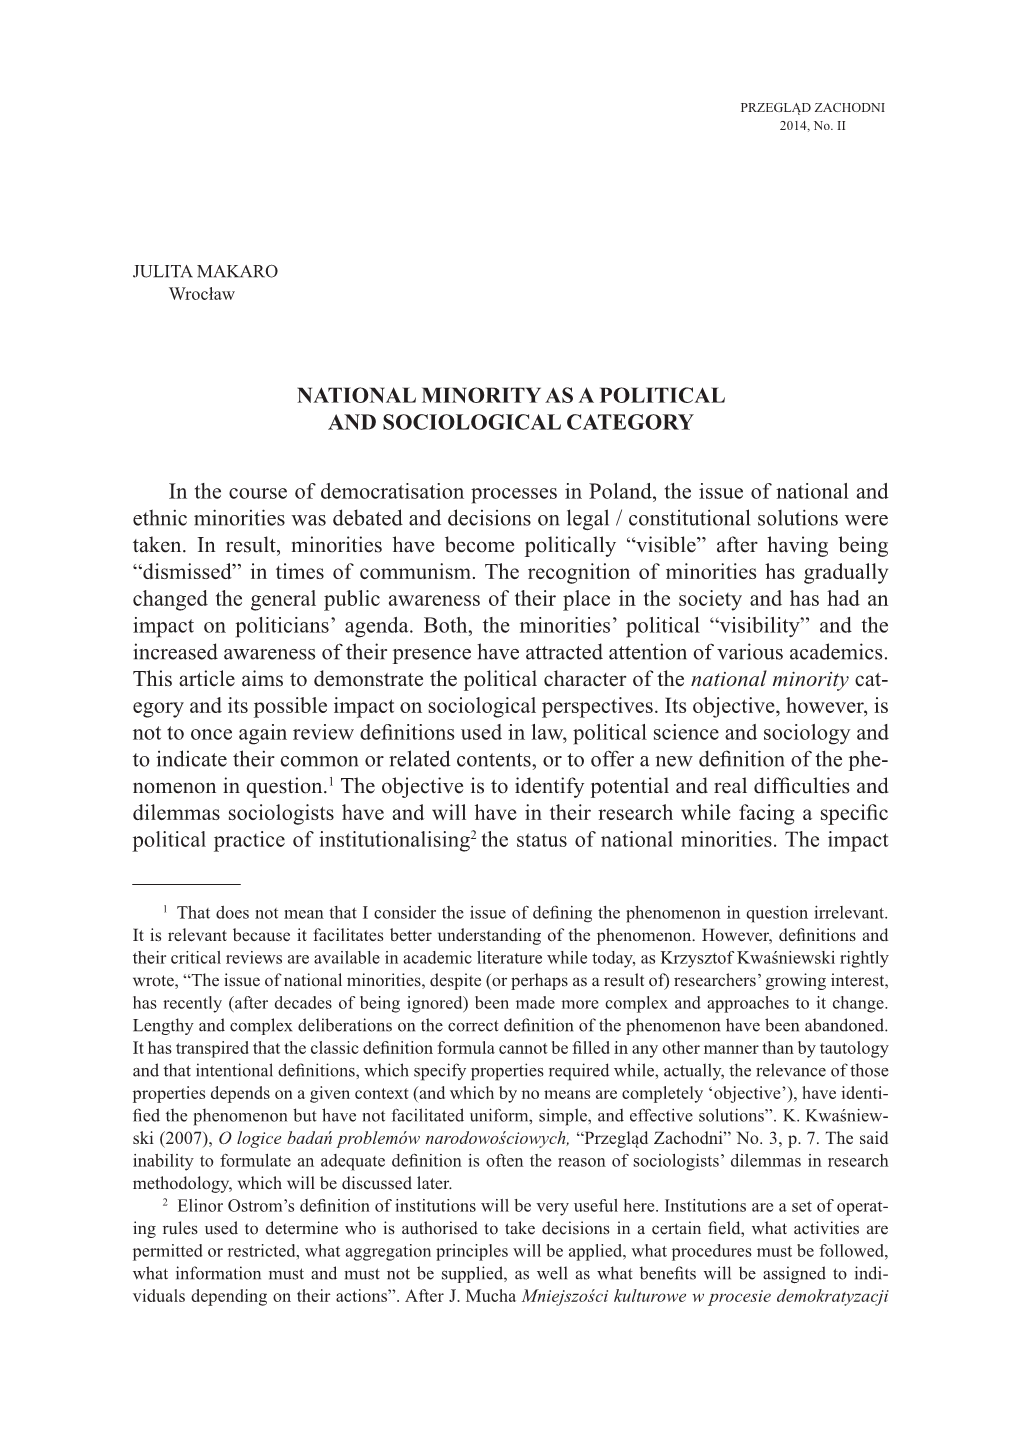 National Minority As a Political and Sociological Category